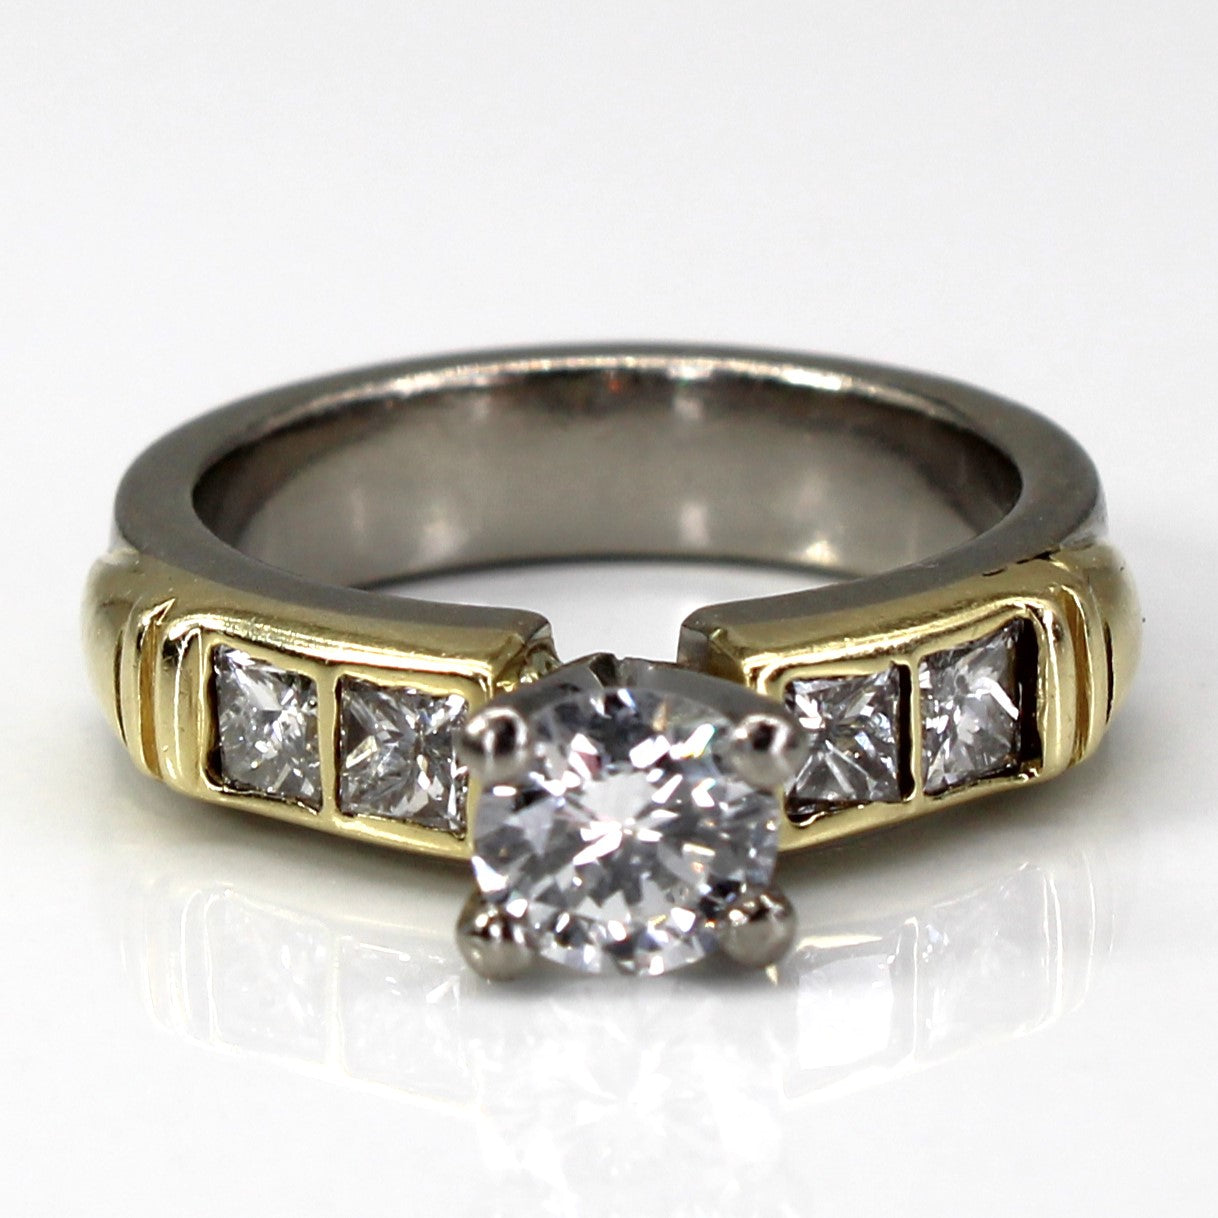 High Set Solitaire with Accents Diamond Ring | 1.44ctw | SZ 5.75 |